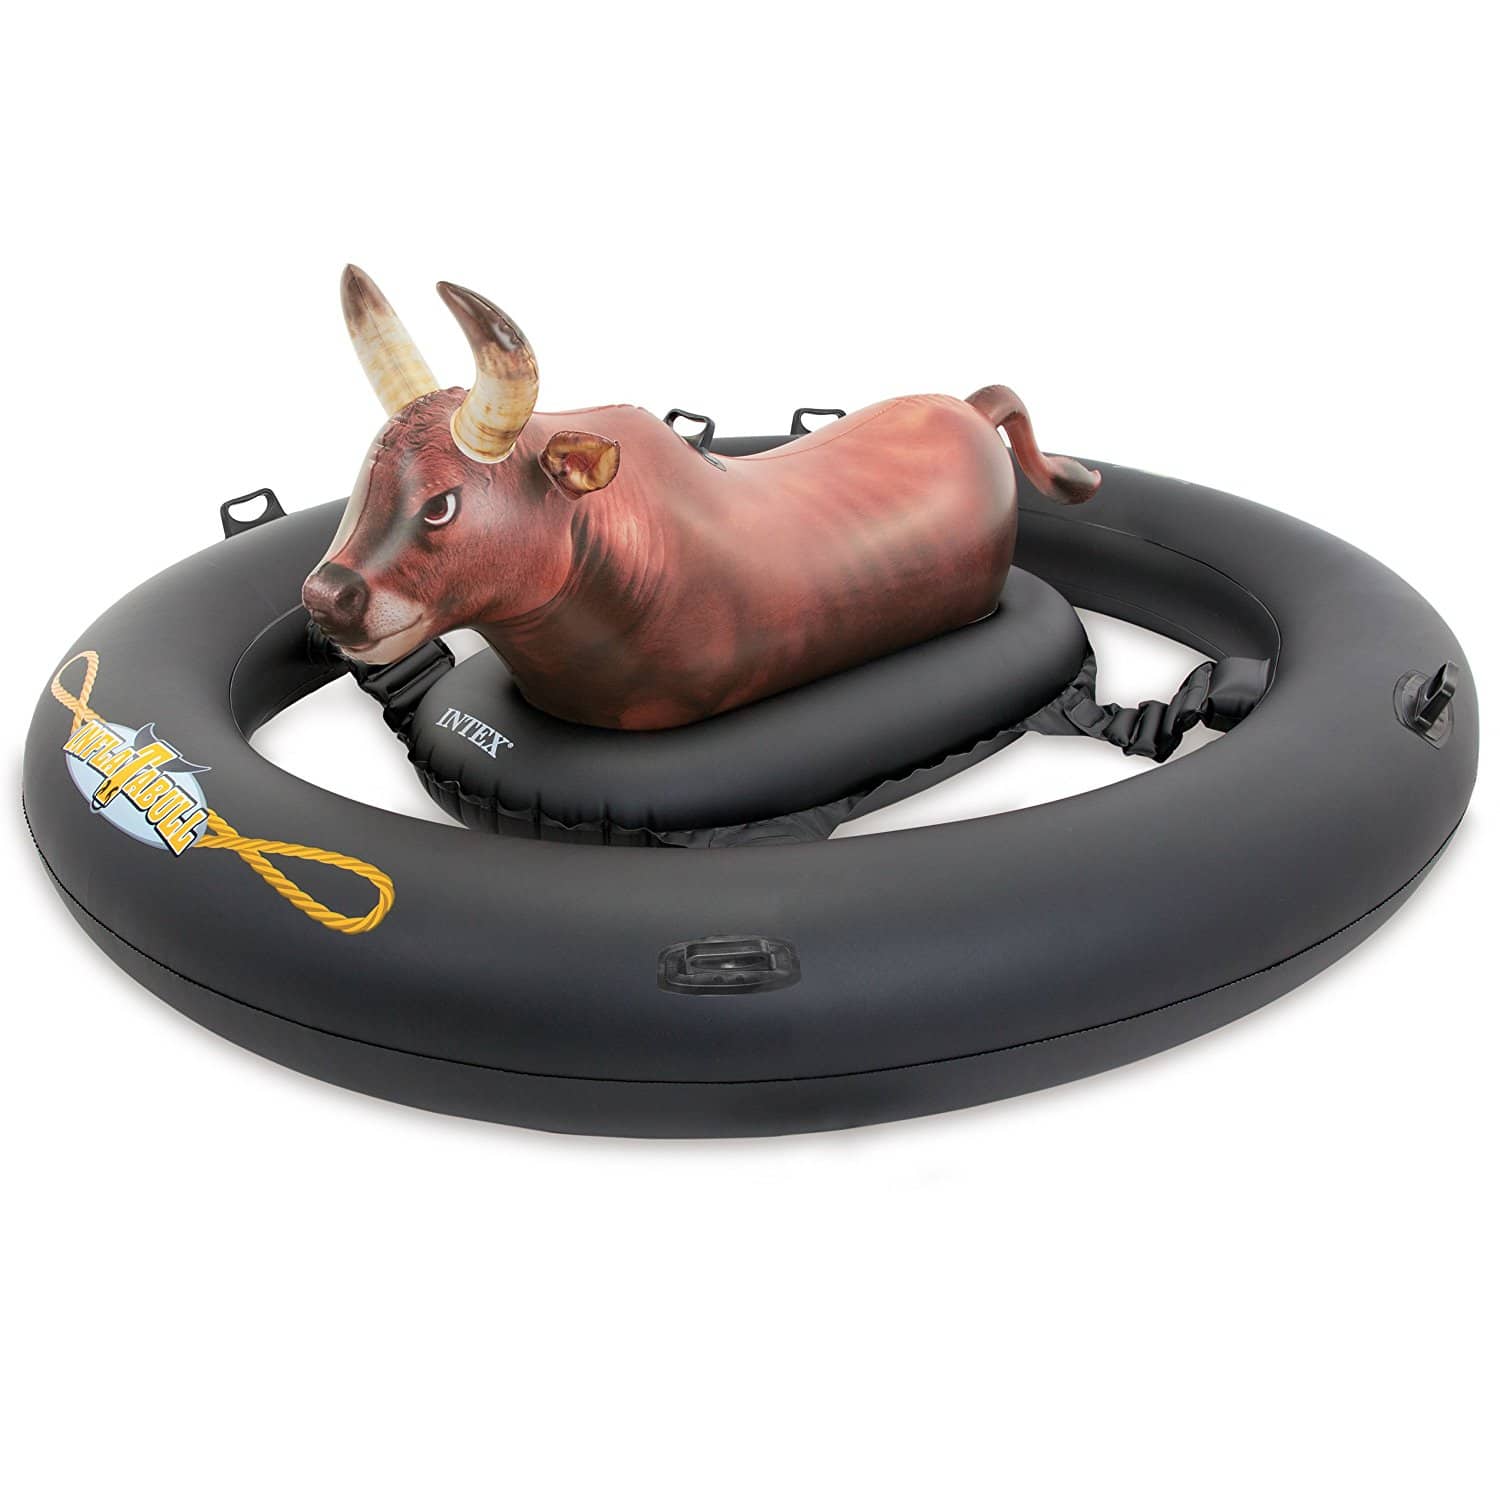 Bull Pool Float: The best pool floats for 2017